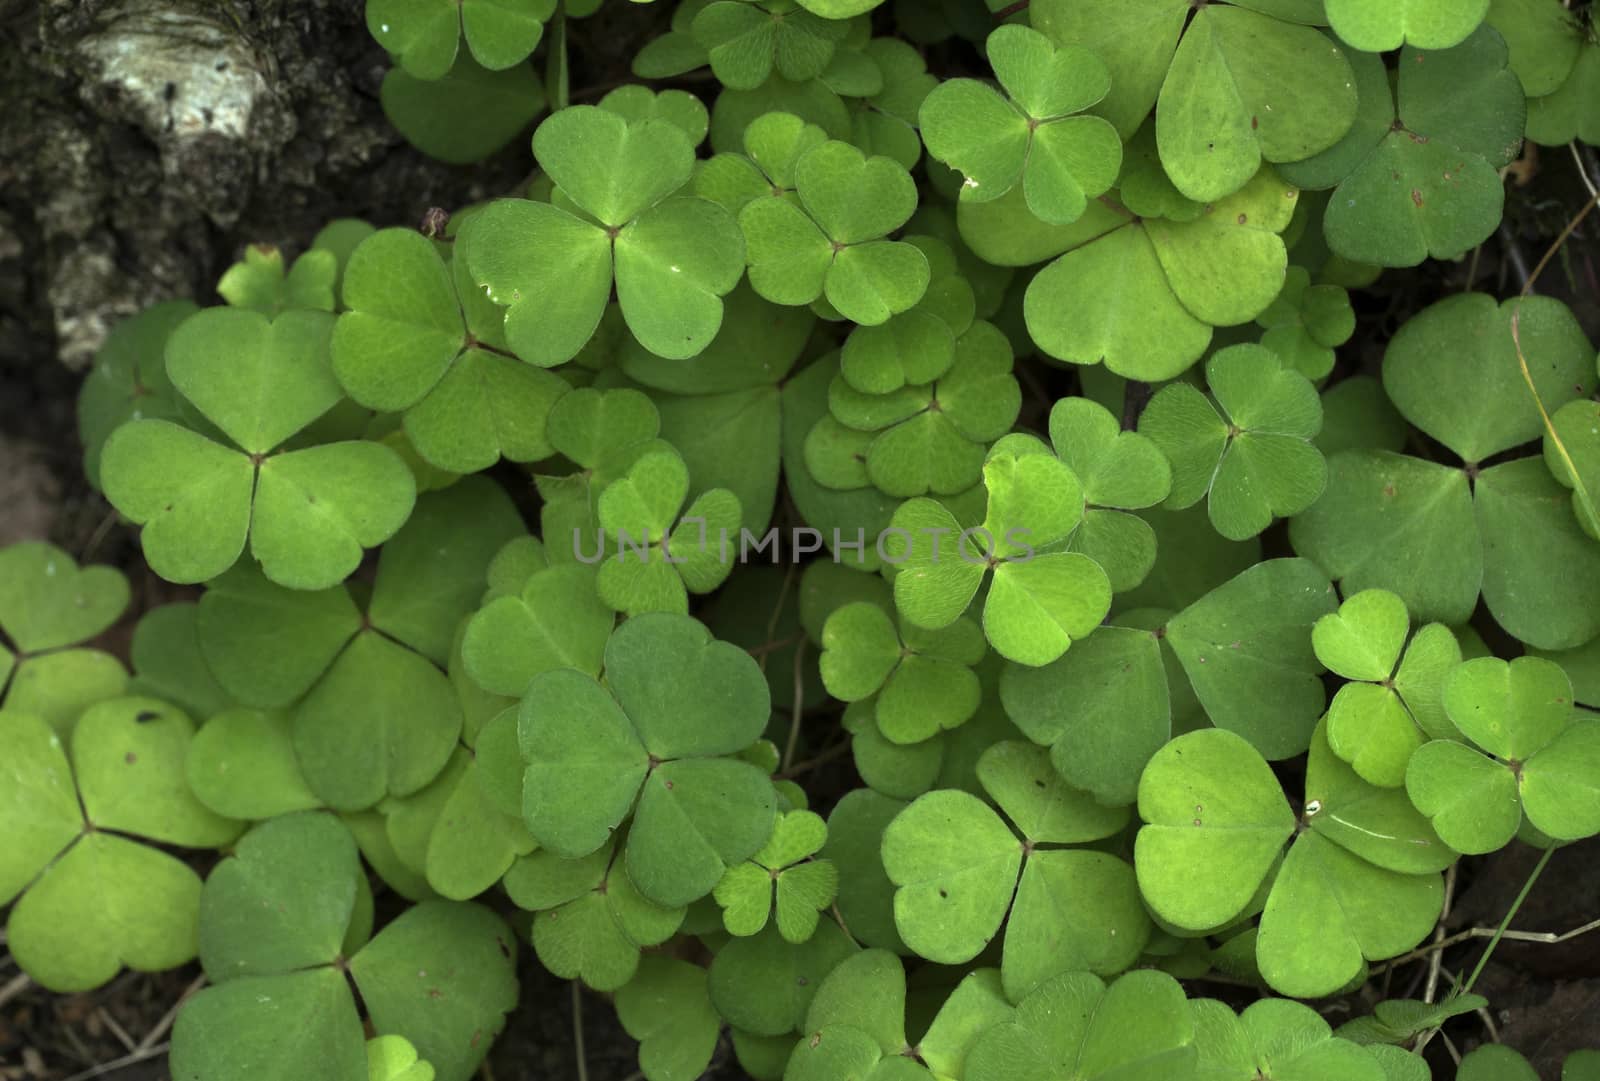 Oxalis acetosella wood sorrel green foliage plant in forest, bunch of green leaves on tree bark.